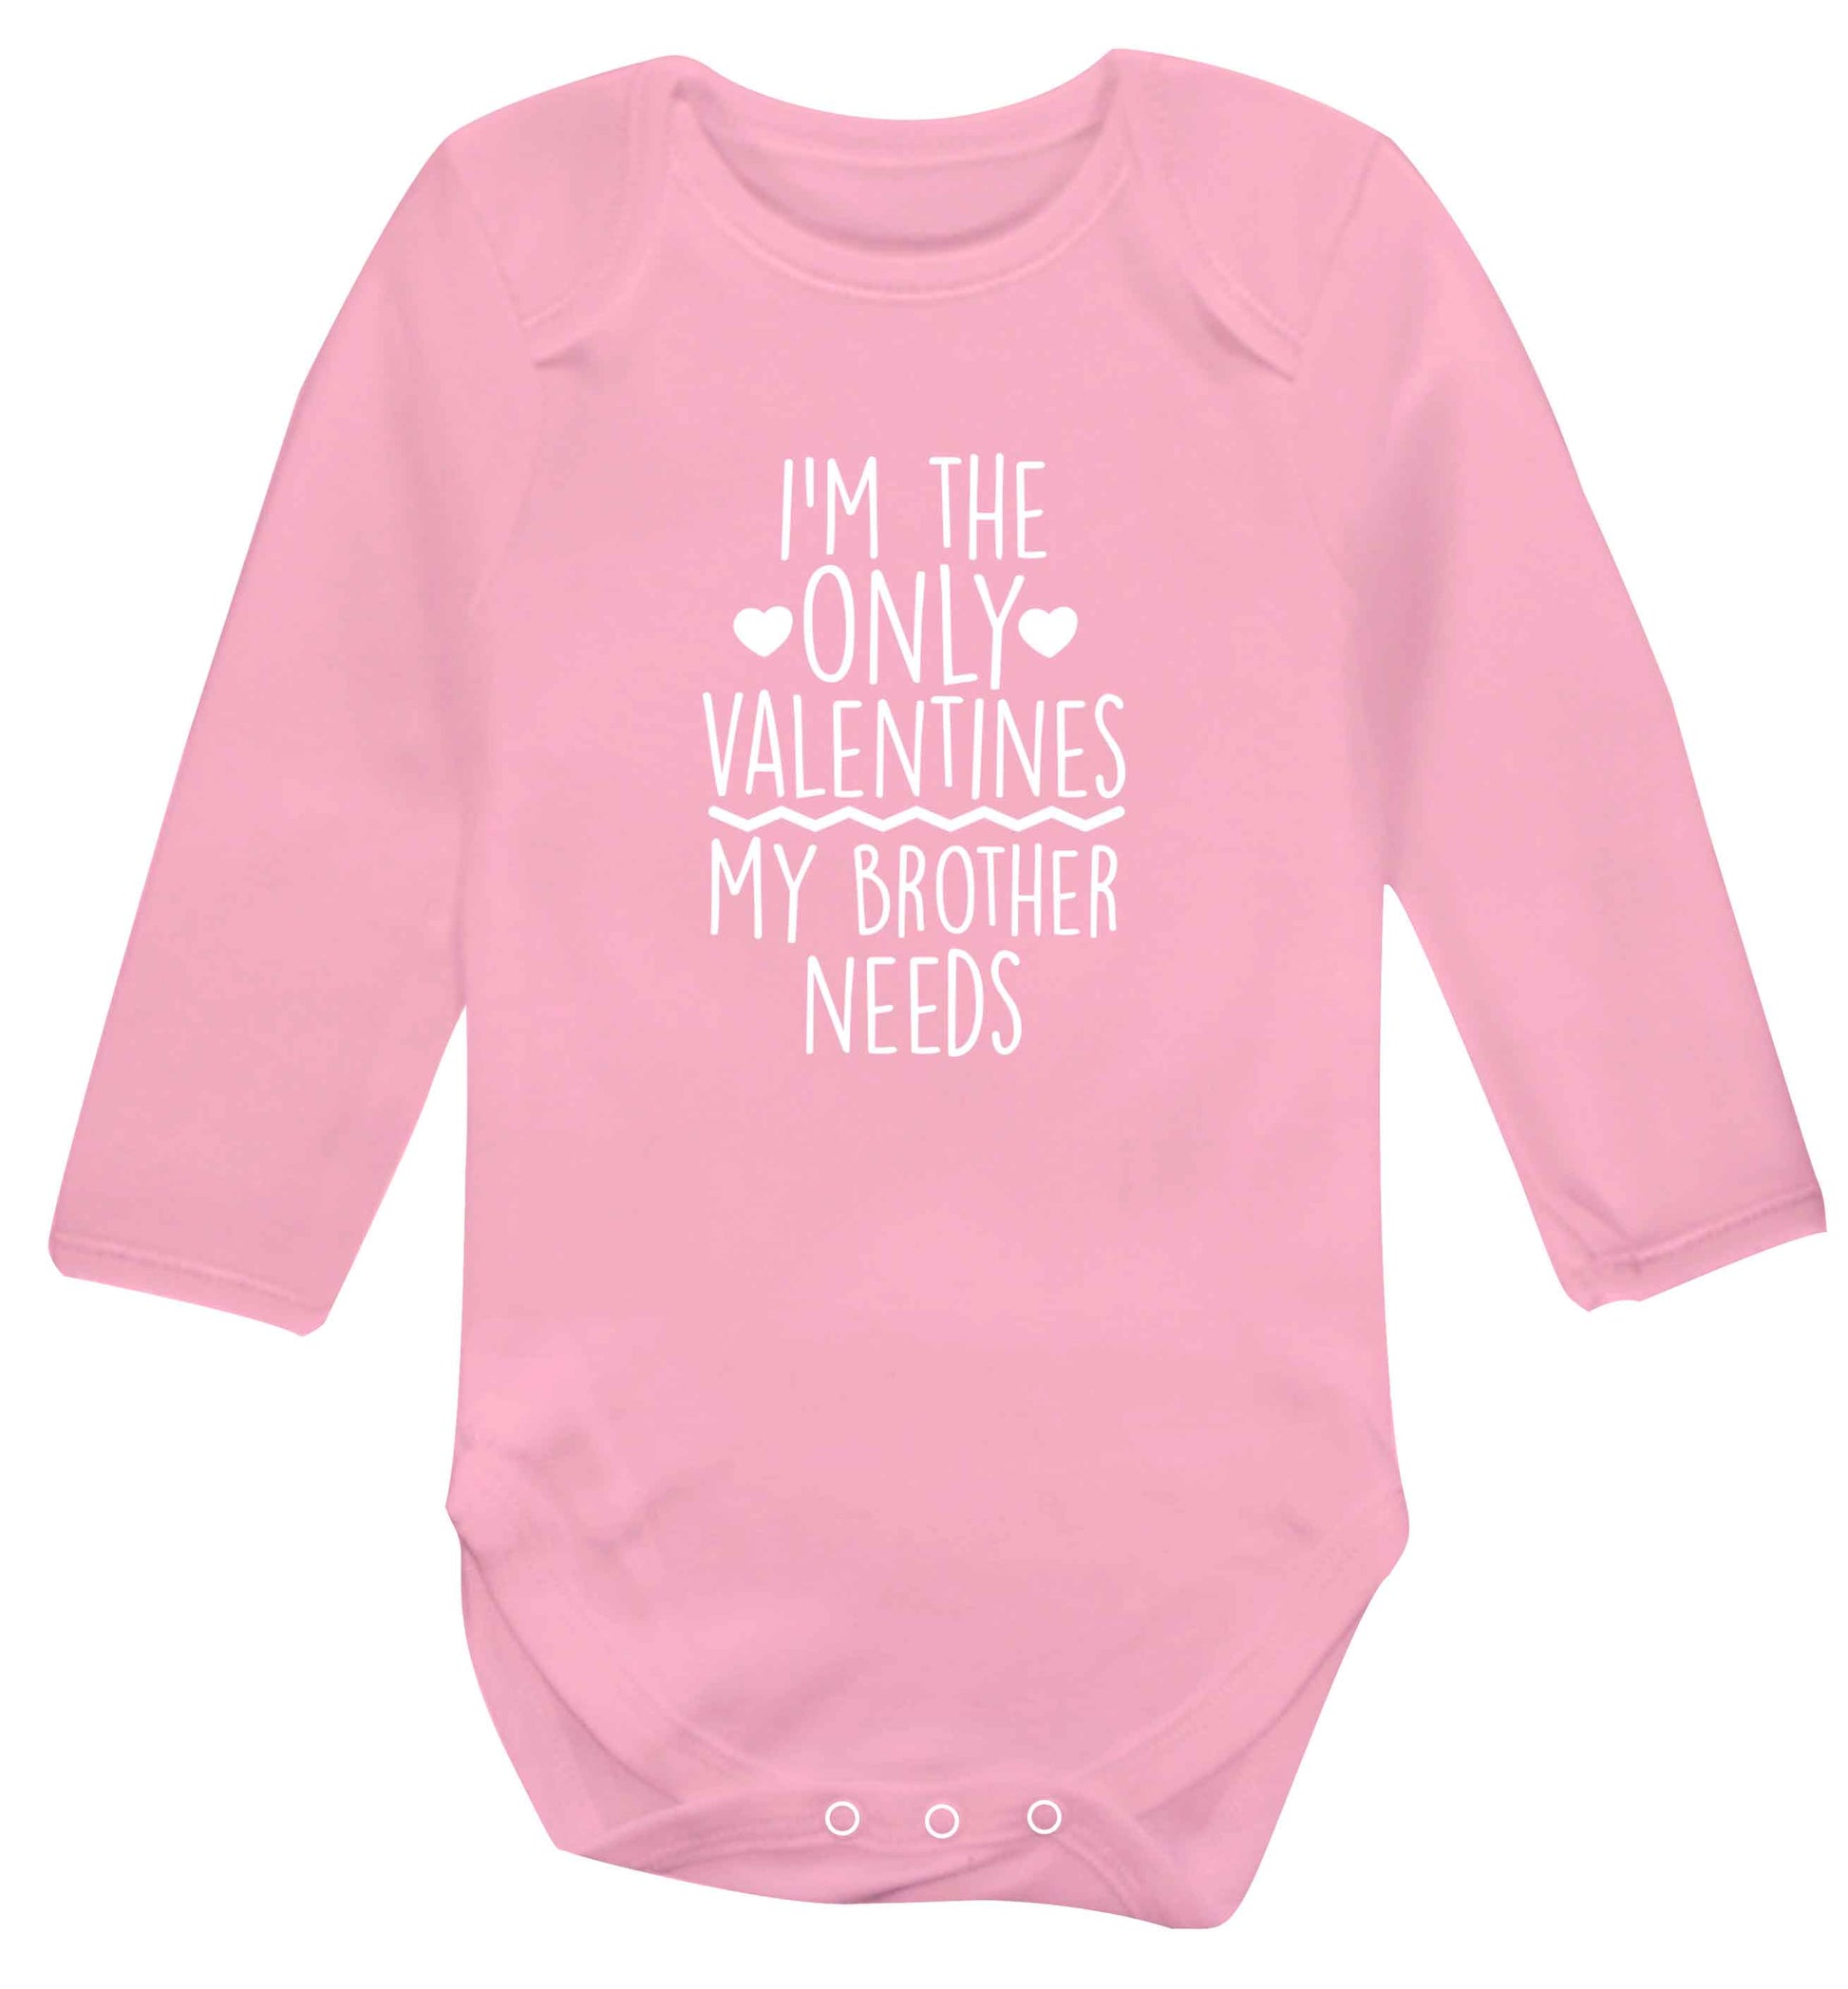 I'm the only valentines my brother needs baby vest long sleeved pale pink 6-12 months